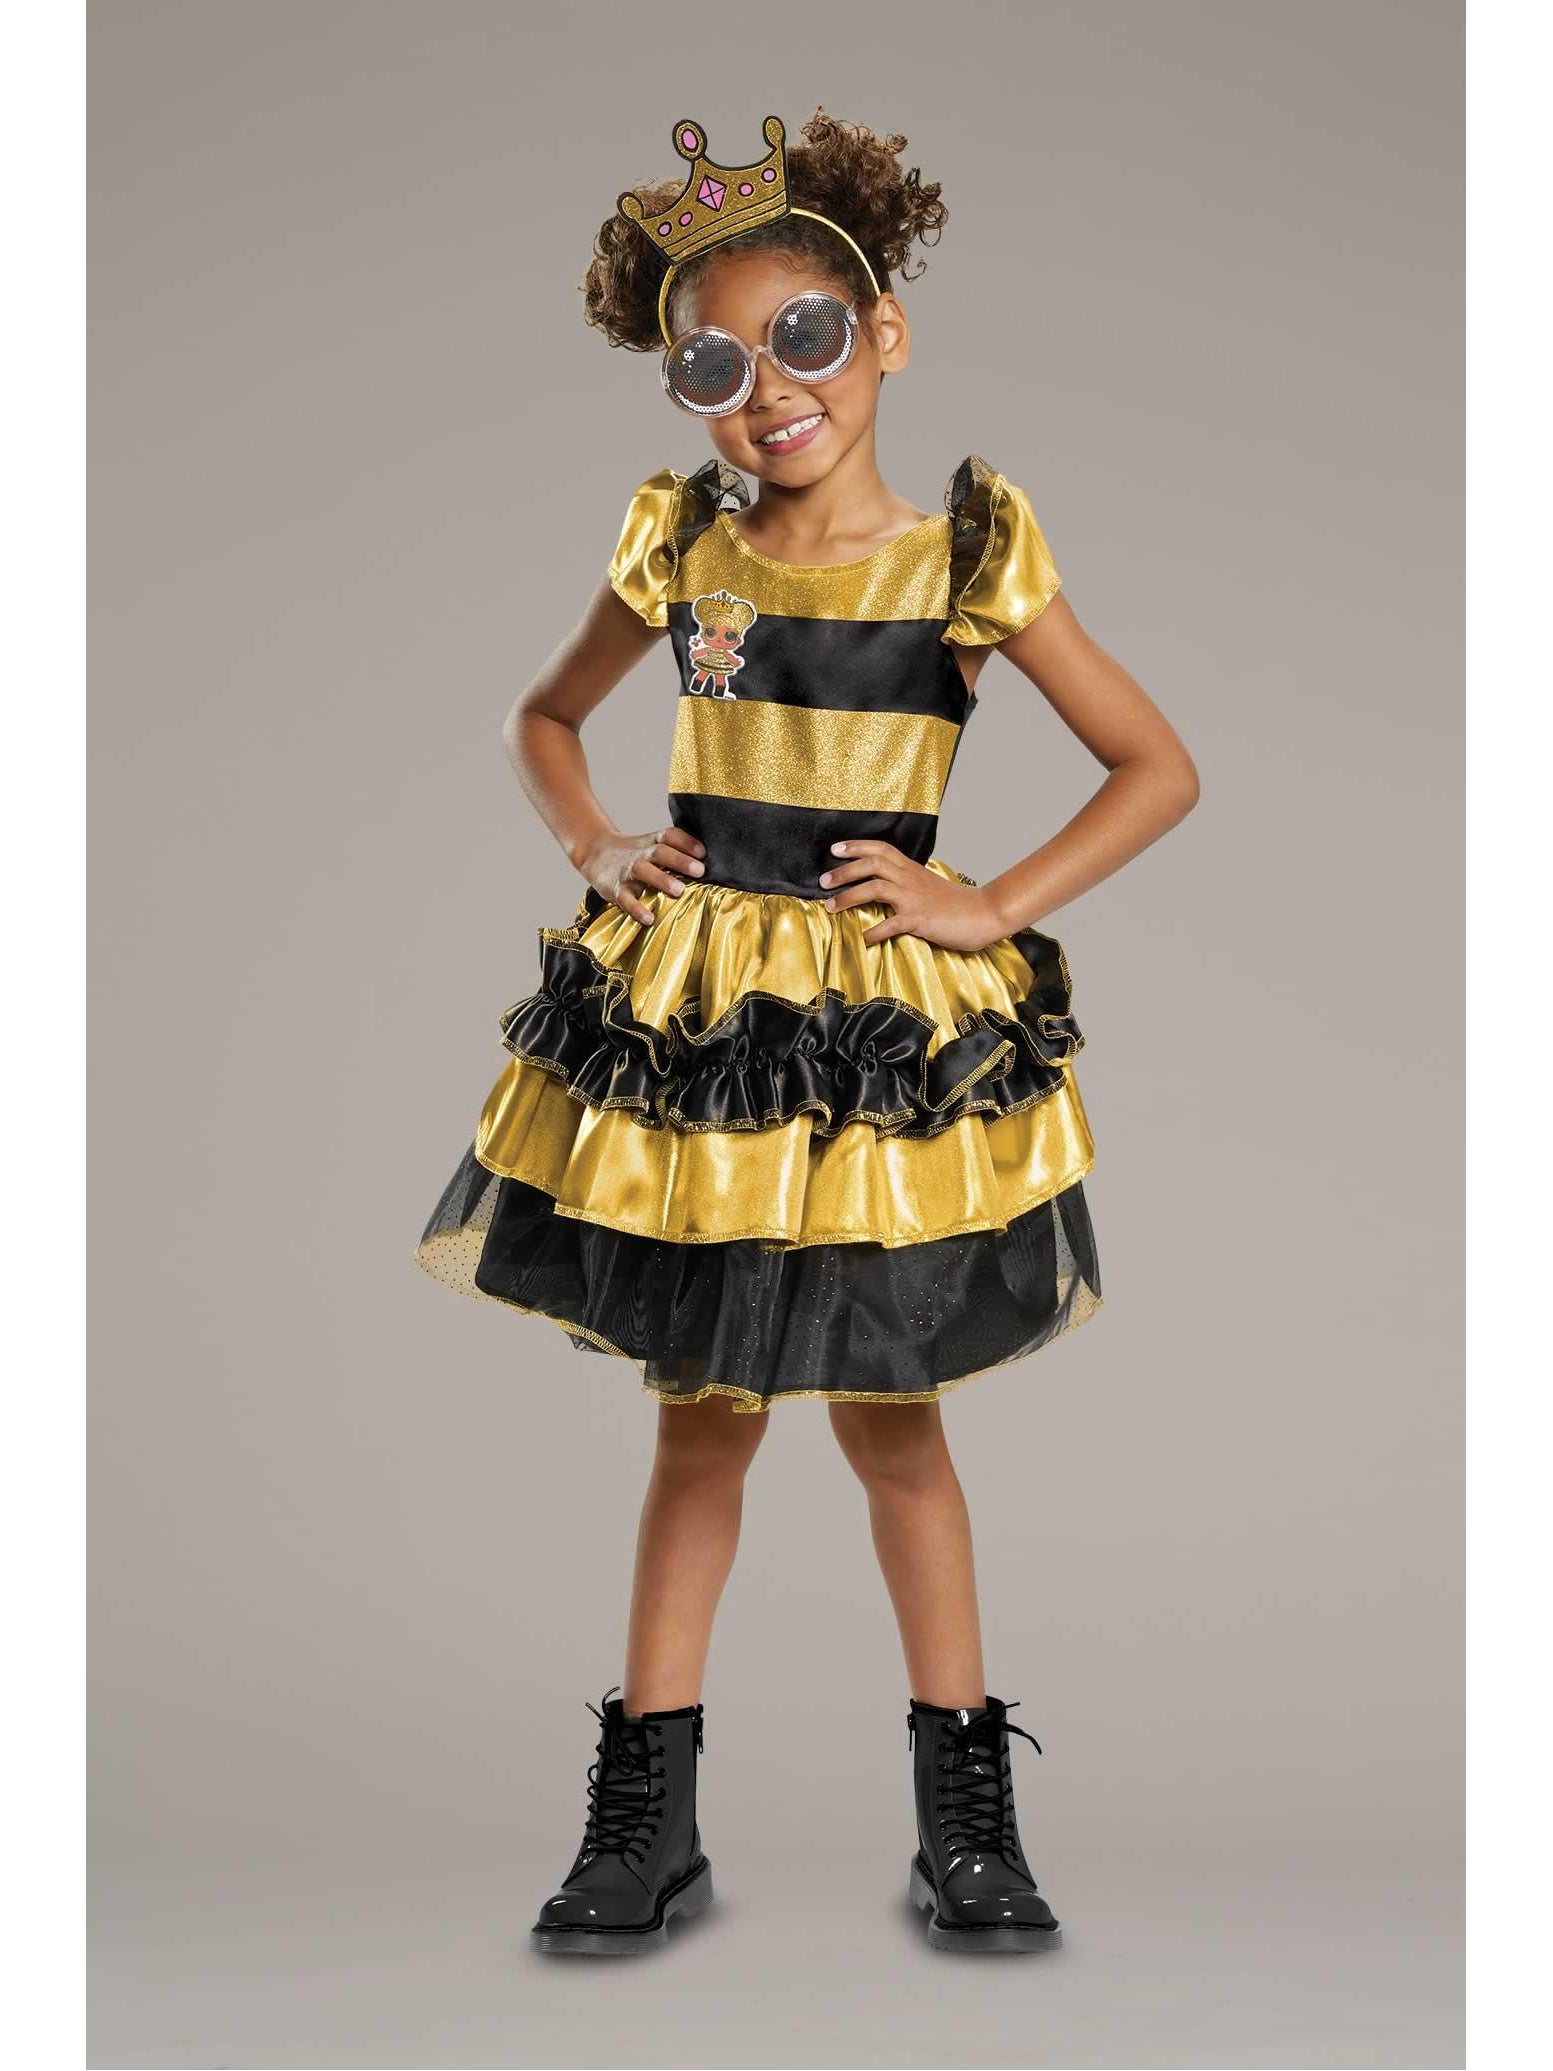 L.O.L. Surprise Queen Bee Doll Costume for Girls - Chasing Fireflies